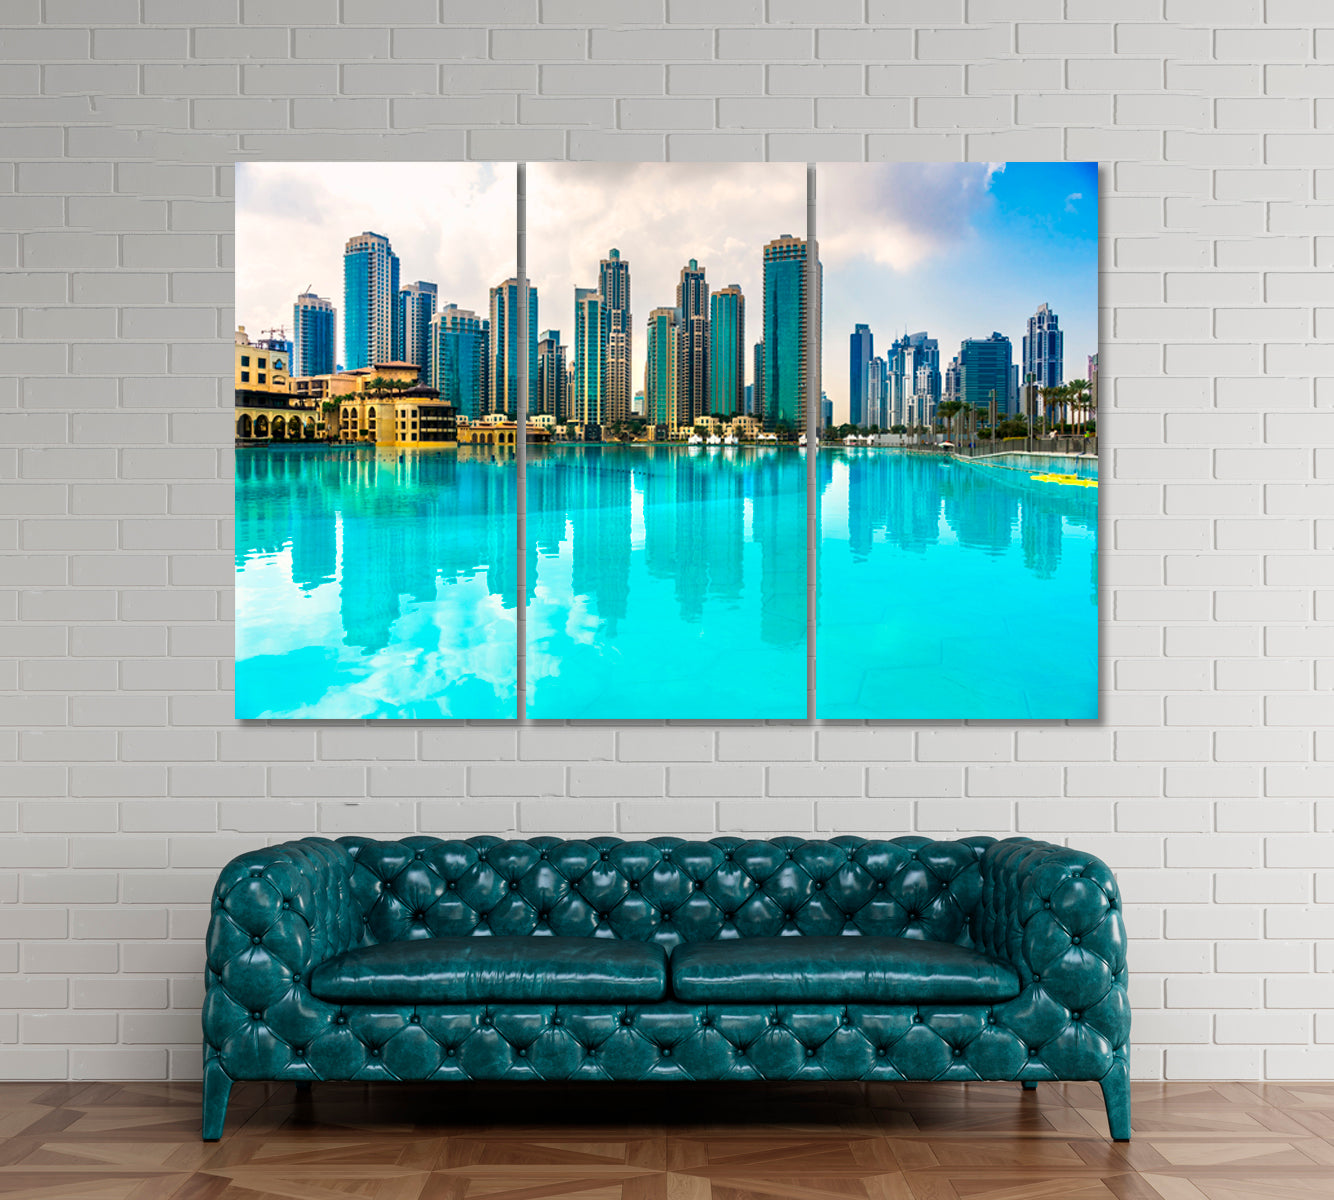 Dubai Cityscape with Singing Fountains Canvas Print ArtLexy 3 Panels 36"x24" inches 